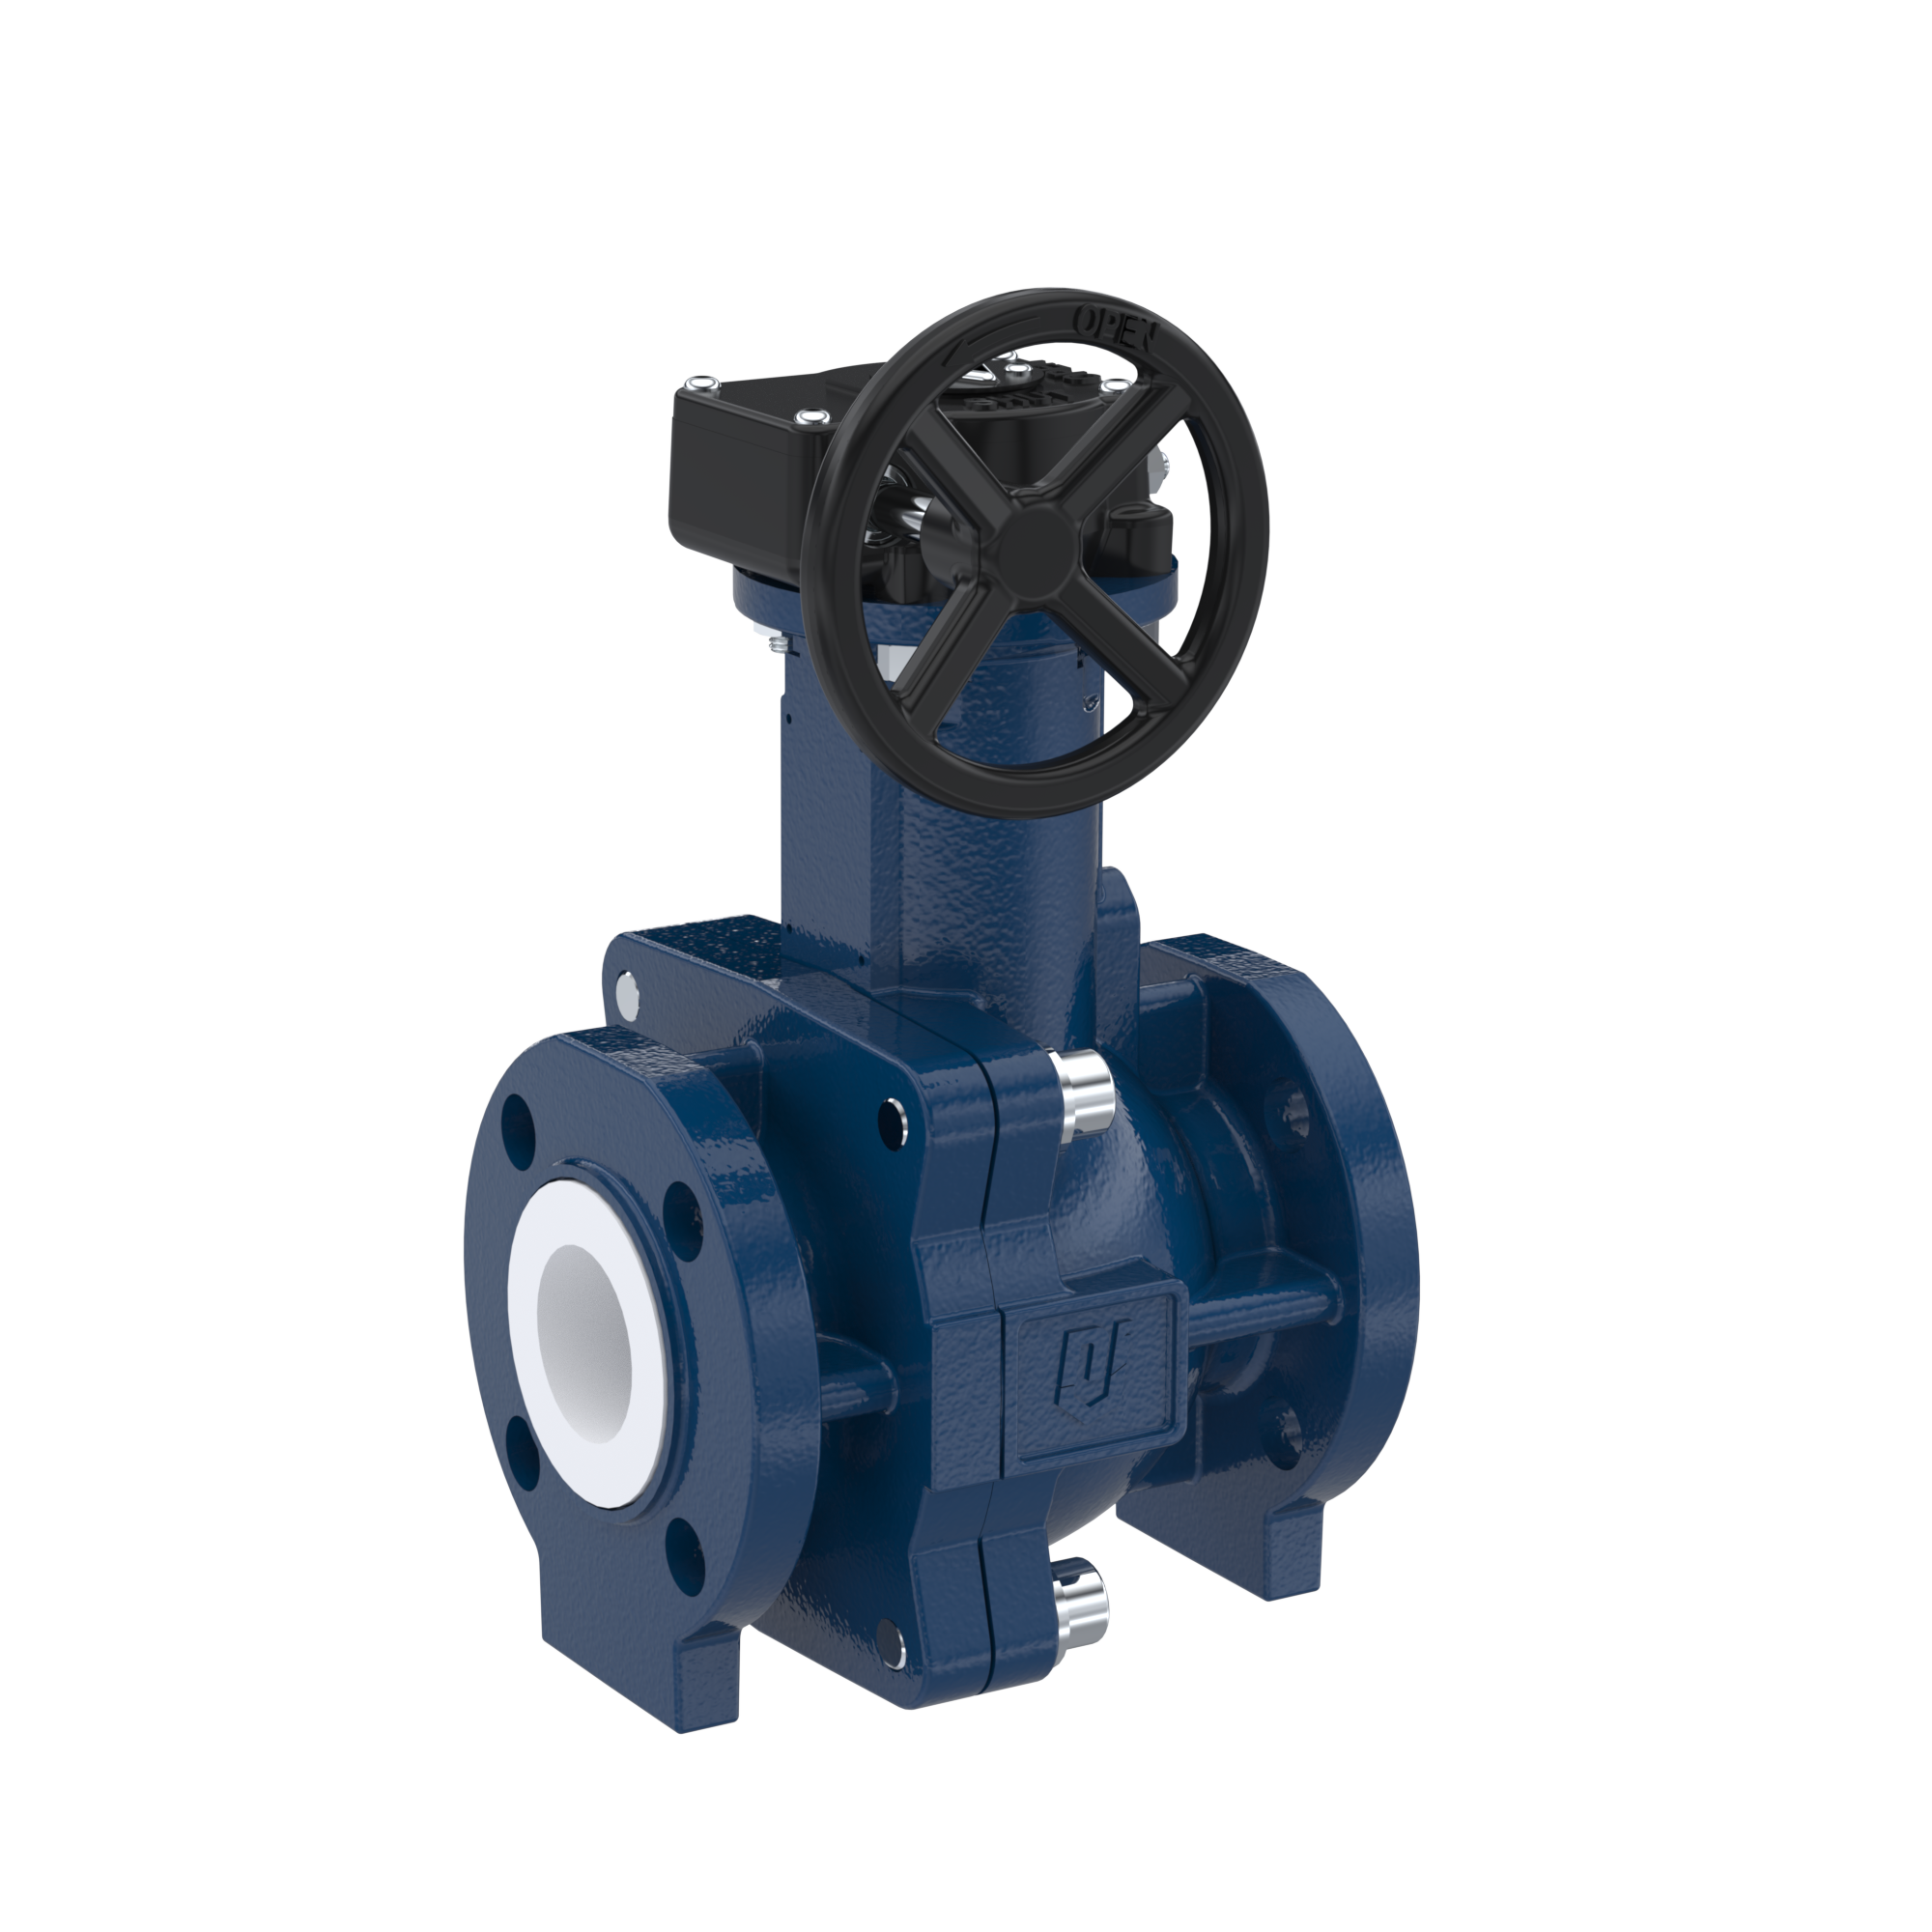 PFA-flange ball valve FK13 DN80 - 3" inch ANSI 150 made of spheroidal graphite cast iron with worm gear